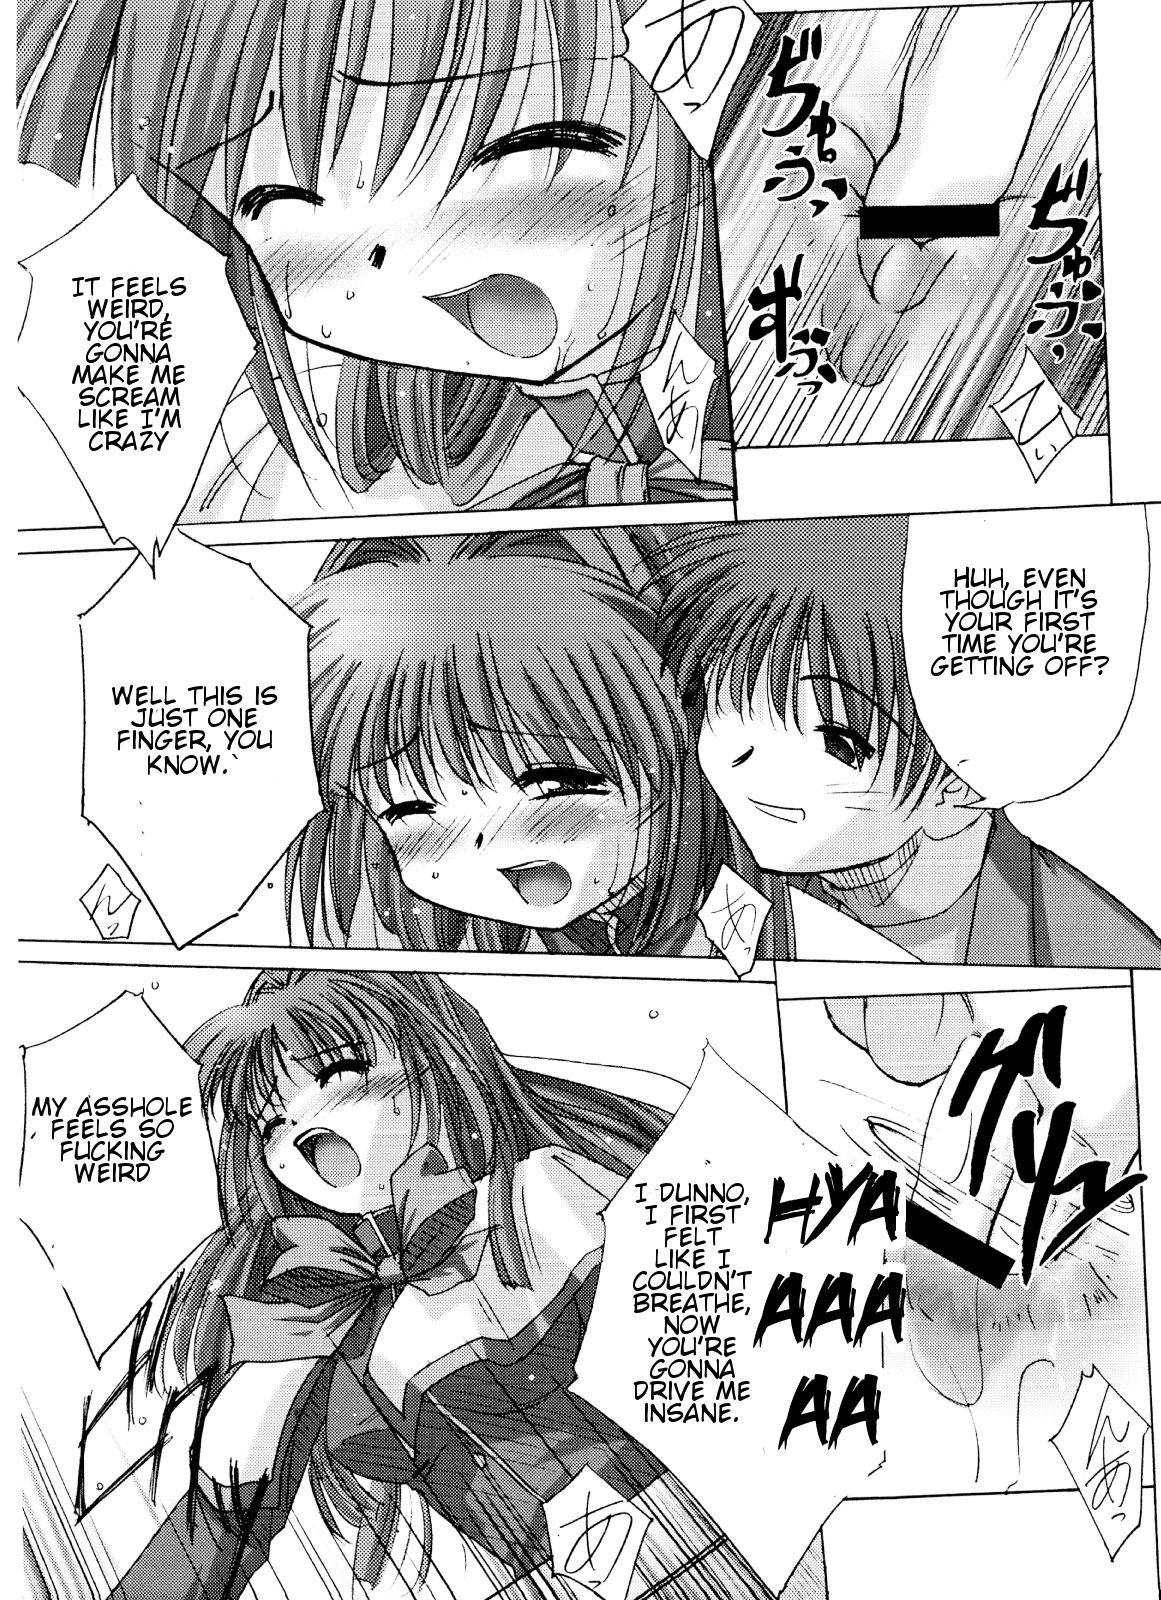 You Are The Only Version: Kanon Part 2 10